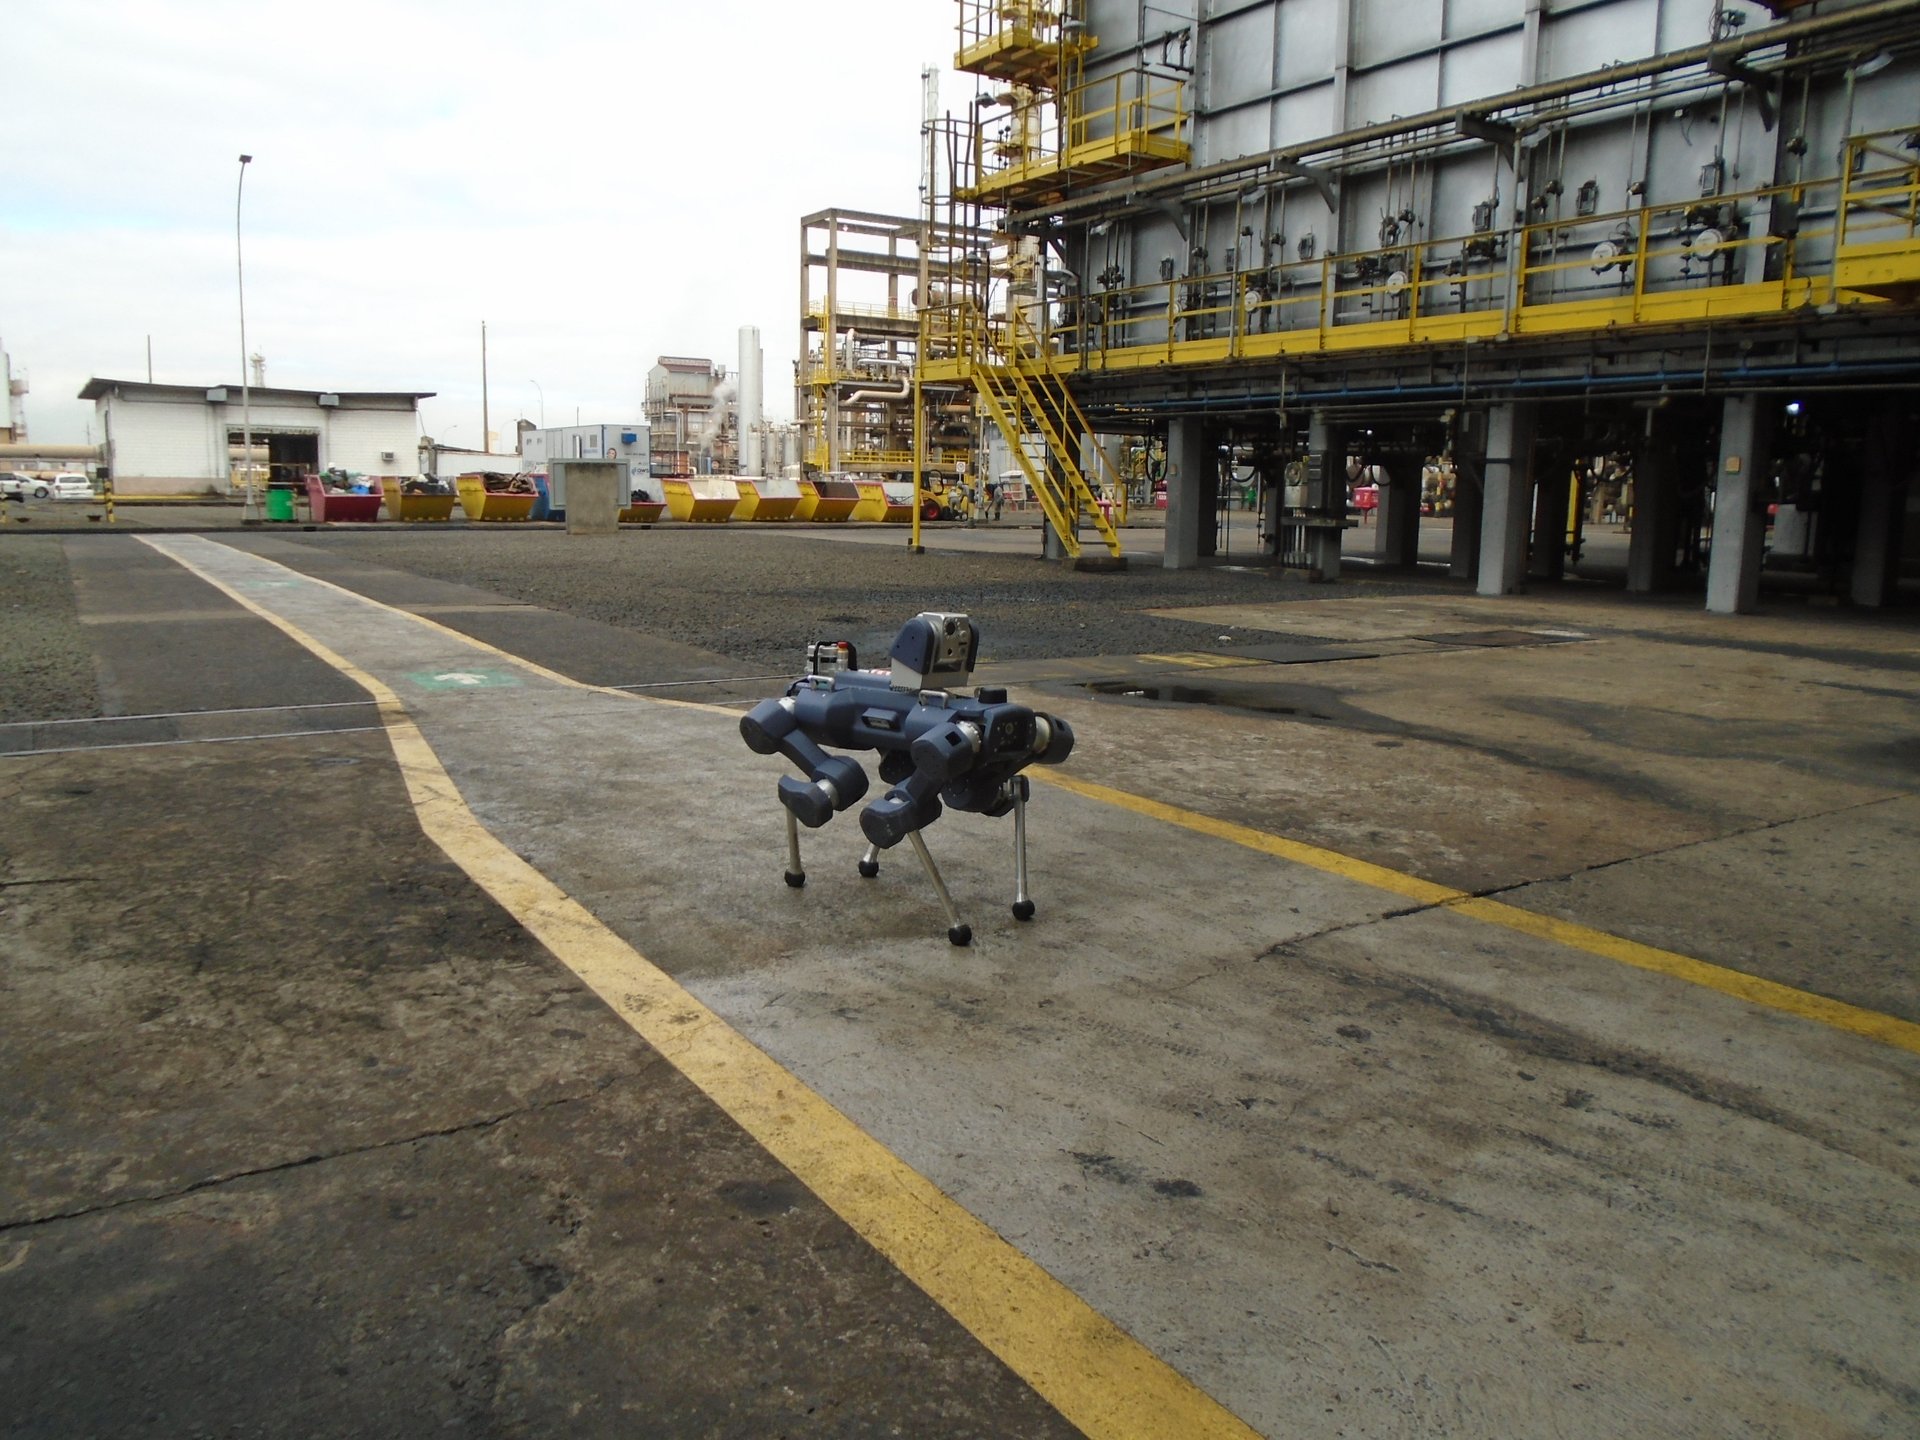 Petrobras invests in robots to automate inspections at its units